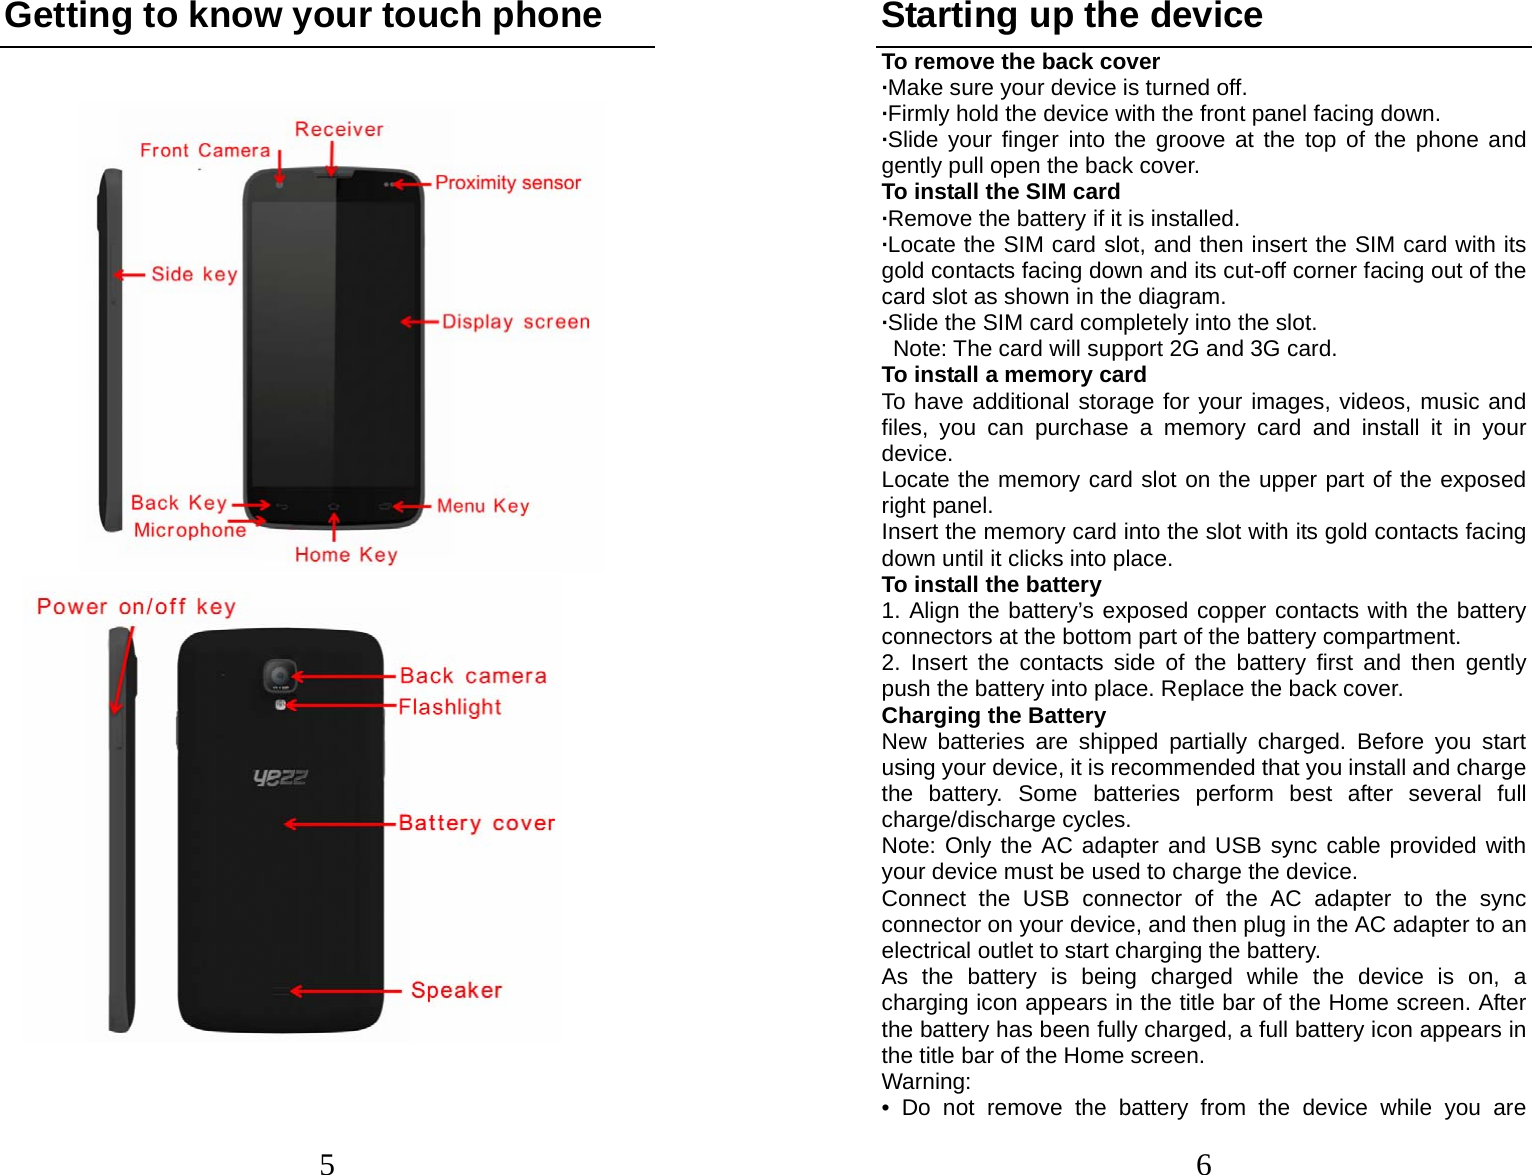 5 Getting to know your touch phone                                     6Starting up the device To remove the back cover   ·Make sure your device is turned off. ·Firmly hold the device with the front panel facing down.   ·Slide your finger into the groove at the top of the phone and gently pull open the back cover. To install the SIM card                    ·Remove the battery if it is installed.   ·Locate the SIM card slot, and then insert the SIM card with its gold contacts facing down and its cut-off corner facing out of the card slot as shown in the diagram. ·Slide the SIM card completely into the slot.   Note: The card will support 2G and 3G card. To install a memory card To have additional storage for your images, videos, music and files, you can purchase a memory card and install it in your device. Locate the memory card slot on the upper part of the exposed right panel. Insert the memory card into the slot with its gold contacts facing down until it clicks into place. To install the battery 1. Align the battery’s exposed copper contacts with the battery connectors at the bottom part of the battery compartment.     2. Insert the contacts side of the battery first and then gently push the battery into place. Replace the back cover. Charging the Battery New batteries are shipped partially charged. Before you start using your device, it is recommended that you install and charge the battery. Some batteries perform best after several full charge/discharge cycles.     Note: Only the AC adapter and USB sync cable provided with your device must be used to charge the device.   Connect the USB connector of the AC adapter to the sync connector on your device, and then plug in the AC adapter to an electrical outlet to start charging the battery.     As the battery is being charged while the device is on, a charging icon appears in the title bar of the Home screen. After the battery has been fully charged, a full battery icon appears in the title bar of the Home screen.     Warning:  • Do not remove the battery from the device while you are 